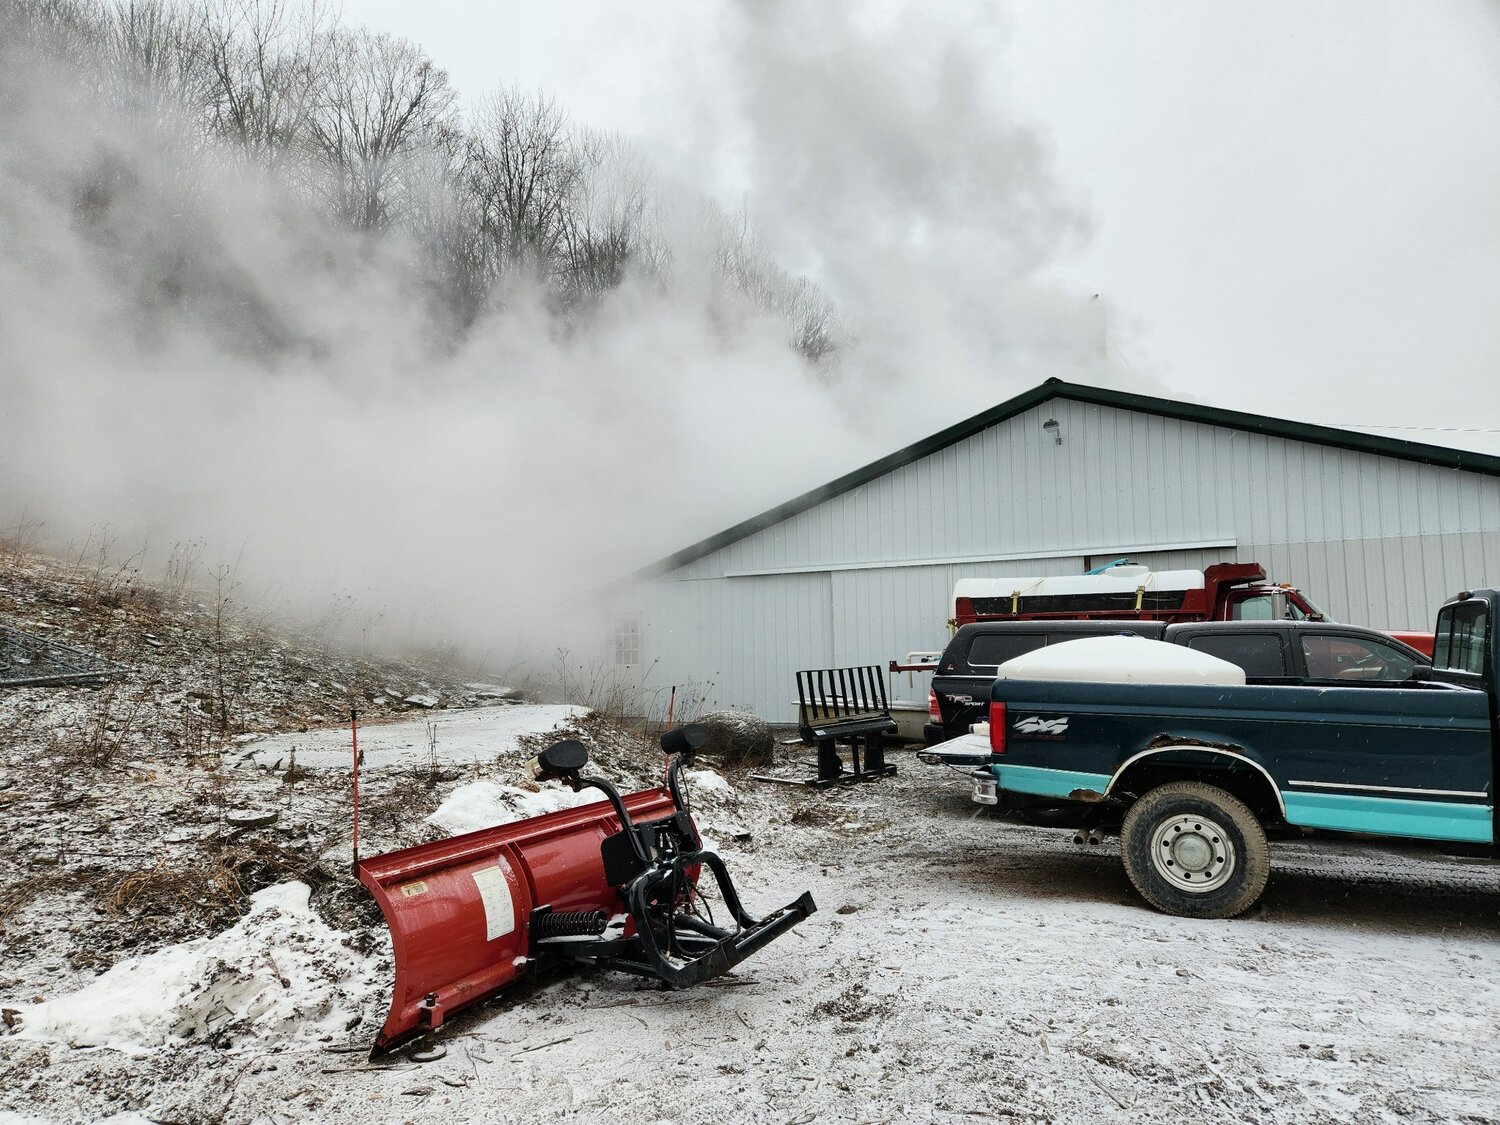 Many Maple Farms boils a large batch of sap in February, with the steam rising over the sugar house.